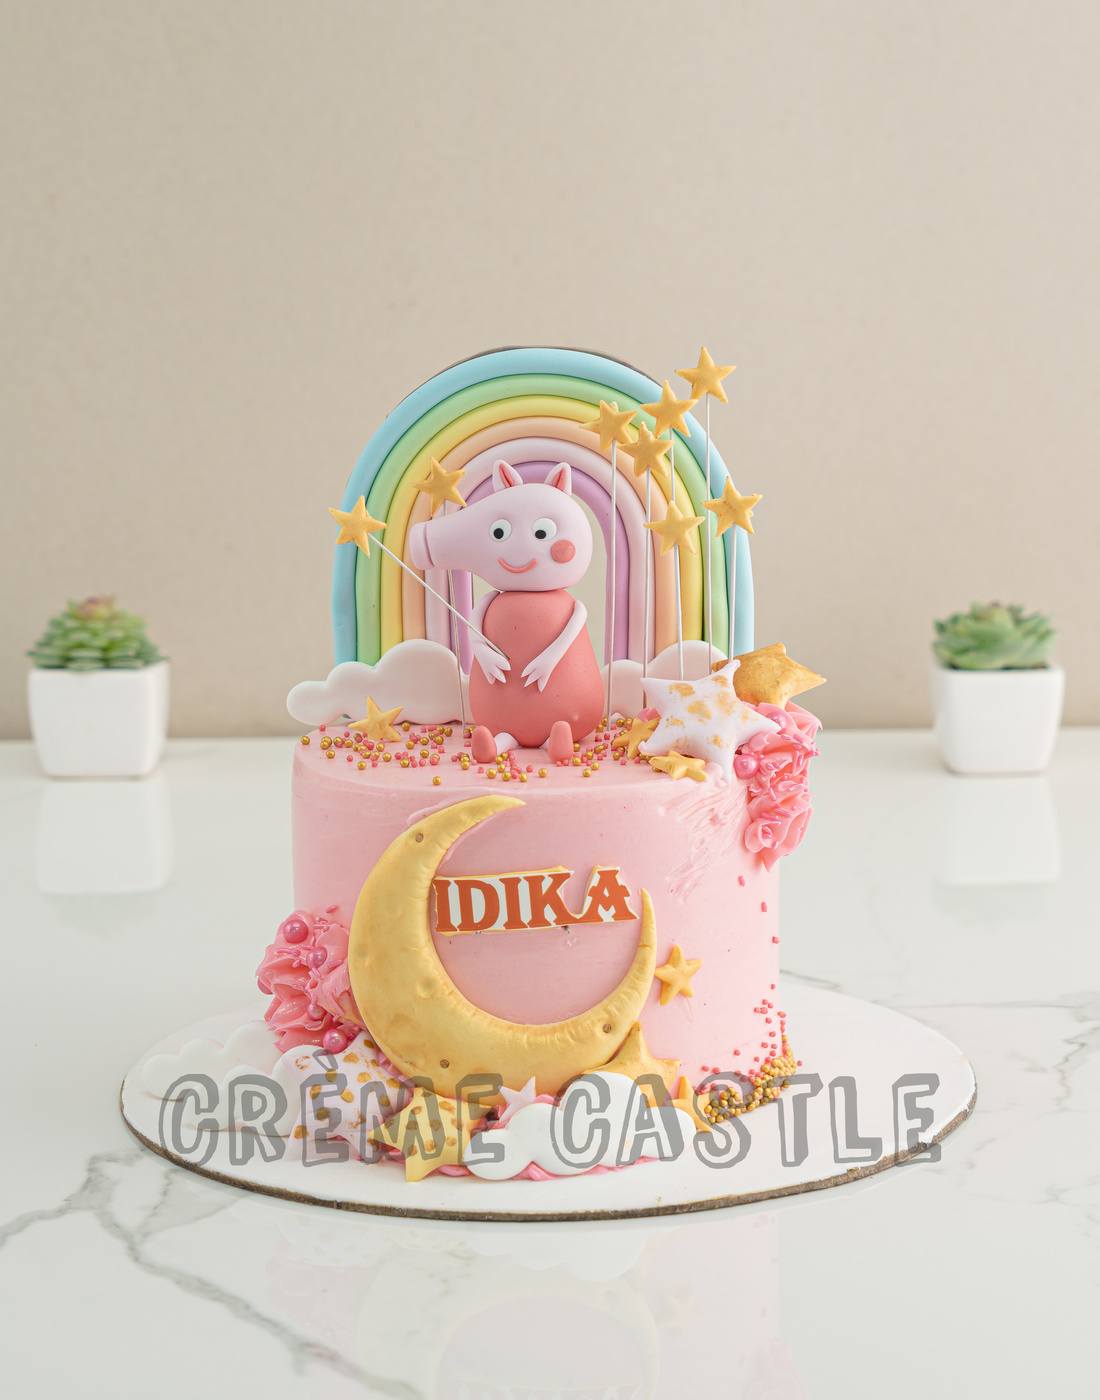 15 Beautiful Peppa Pig Cake Ideas & Designs (You NEED To See Them)